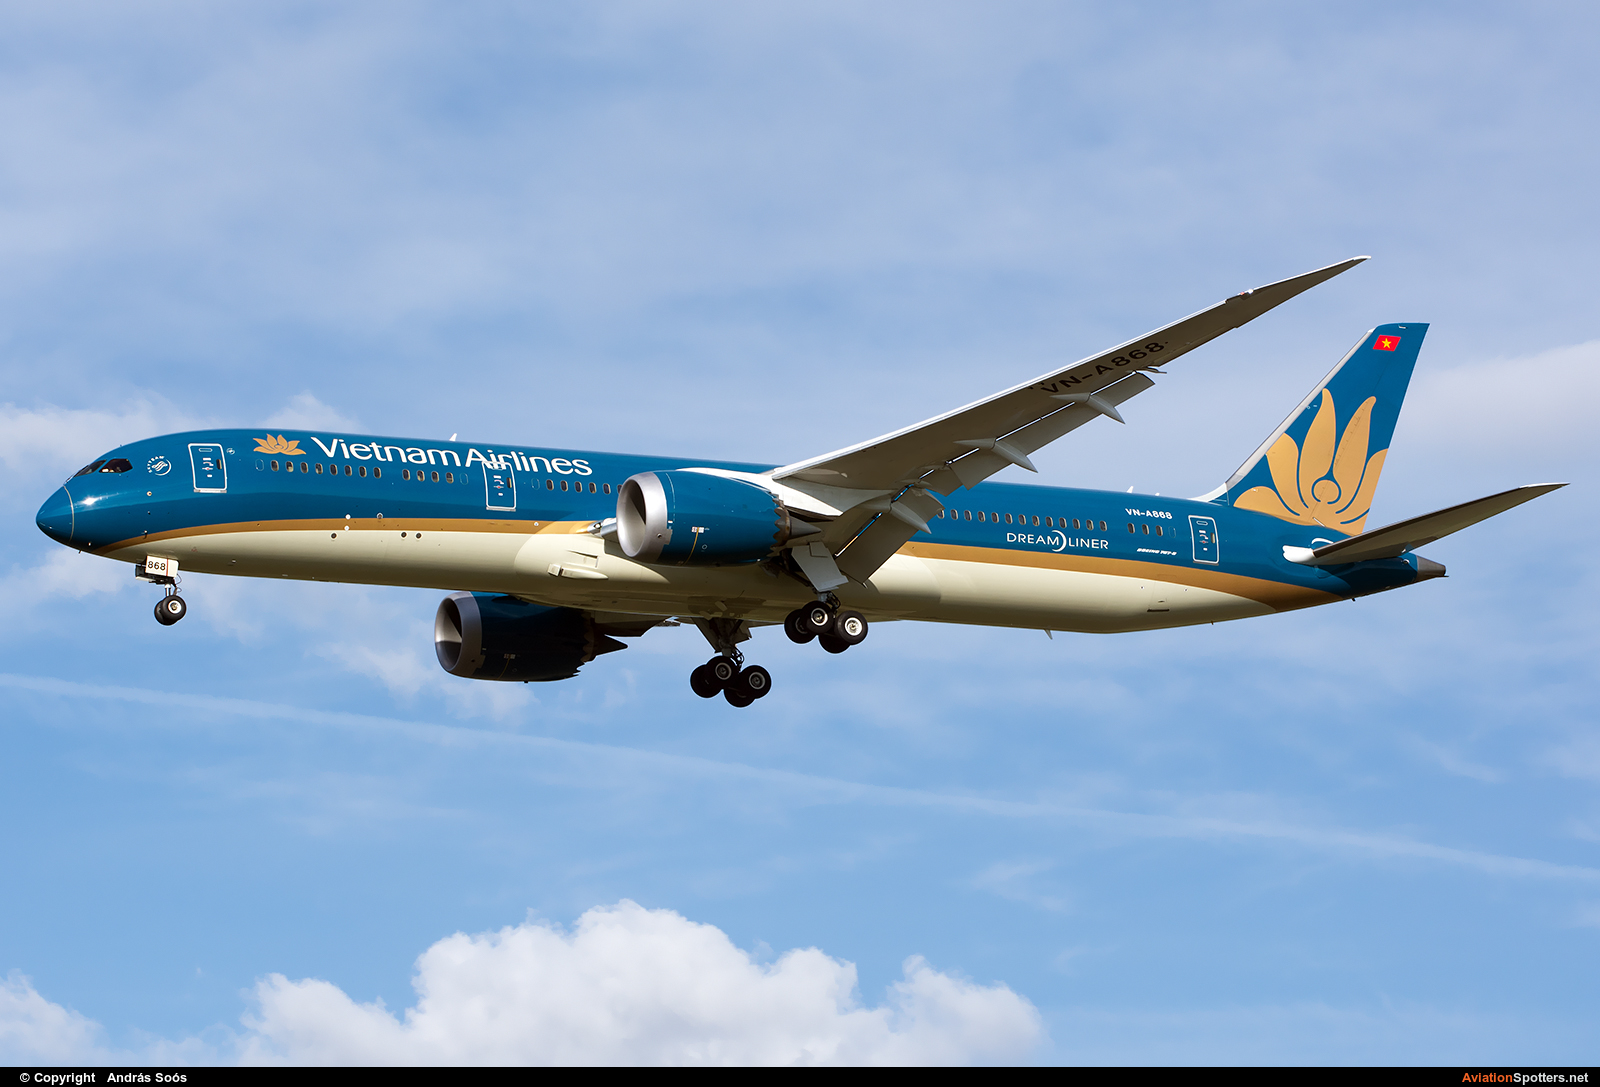 Vietnam Airlines  -  787-9 Dreamliner  (VN-A868) By András Soós (sas1965)